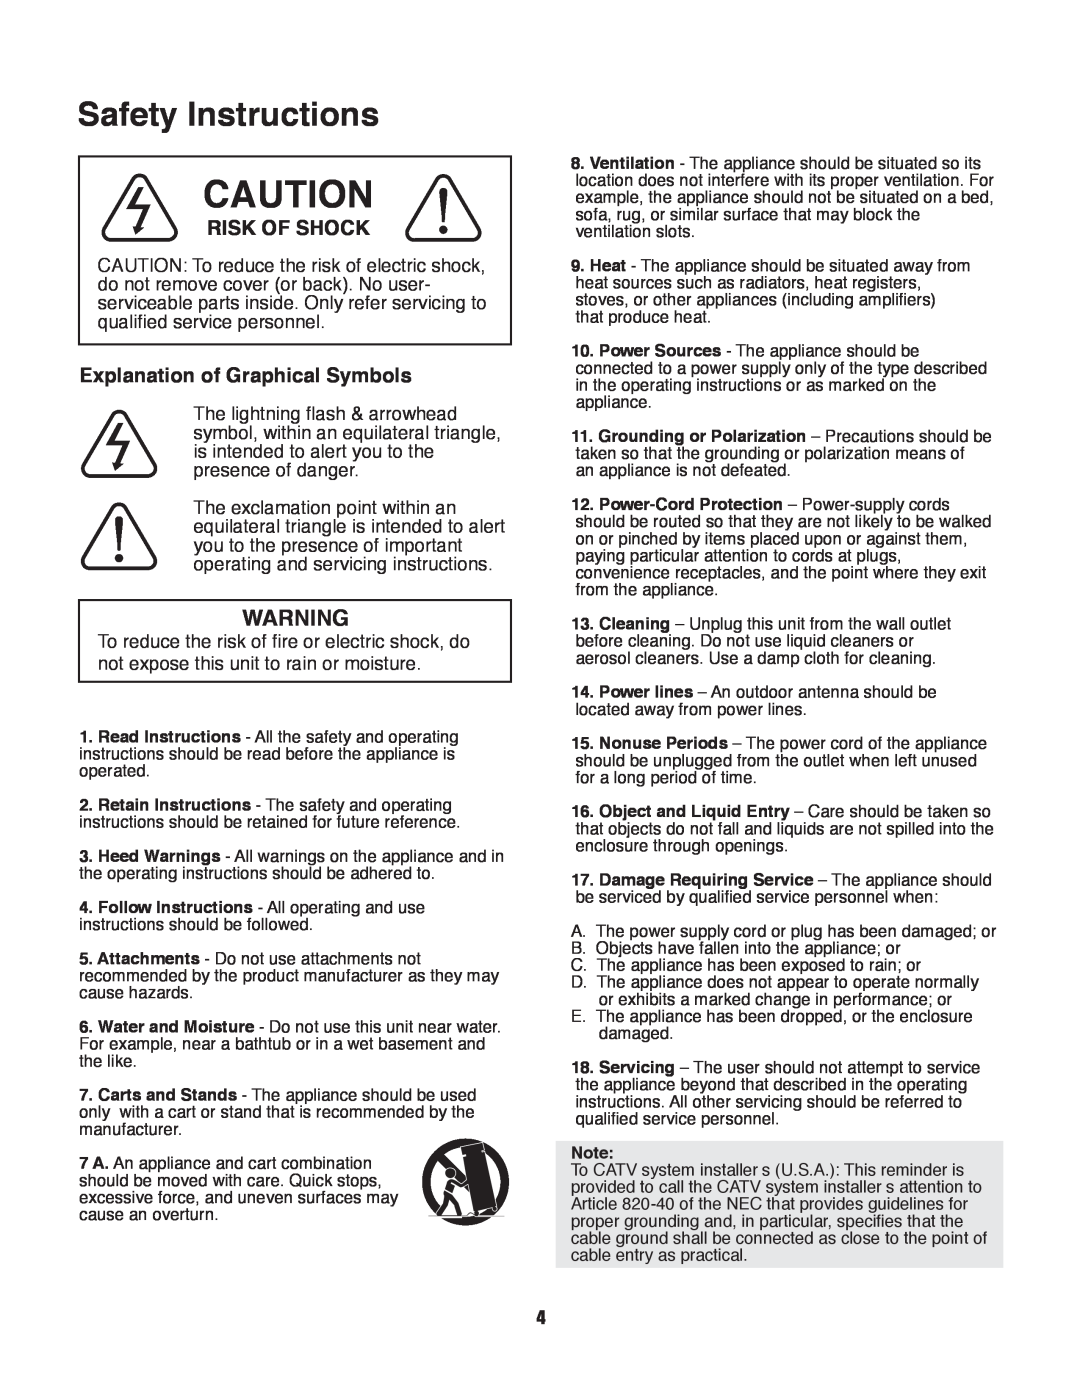 VocoPro PIANO-5 owner manual Safety Instructions, Risk Of Shock, Explanation of Graphical Symbols 